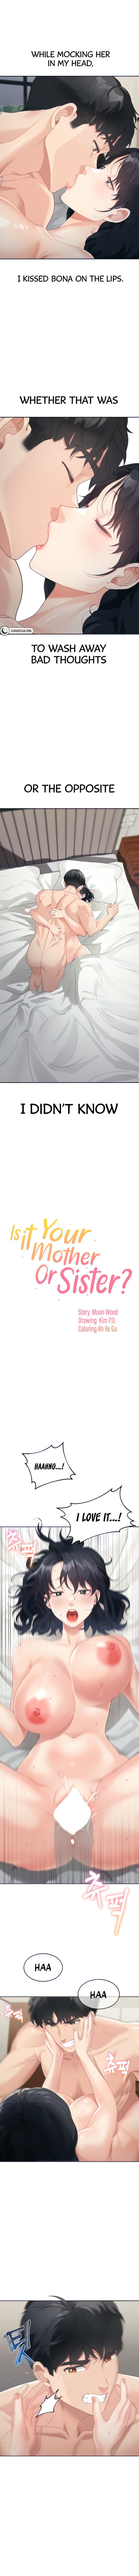 is-it-your-mother-or-sister-chap-6-0